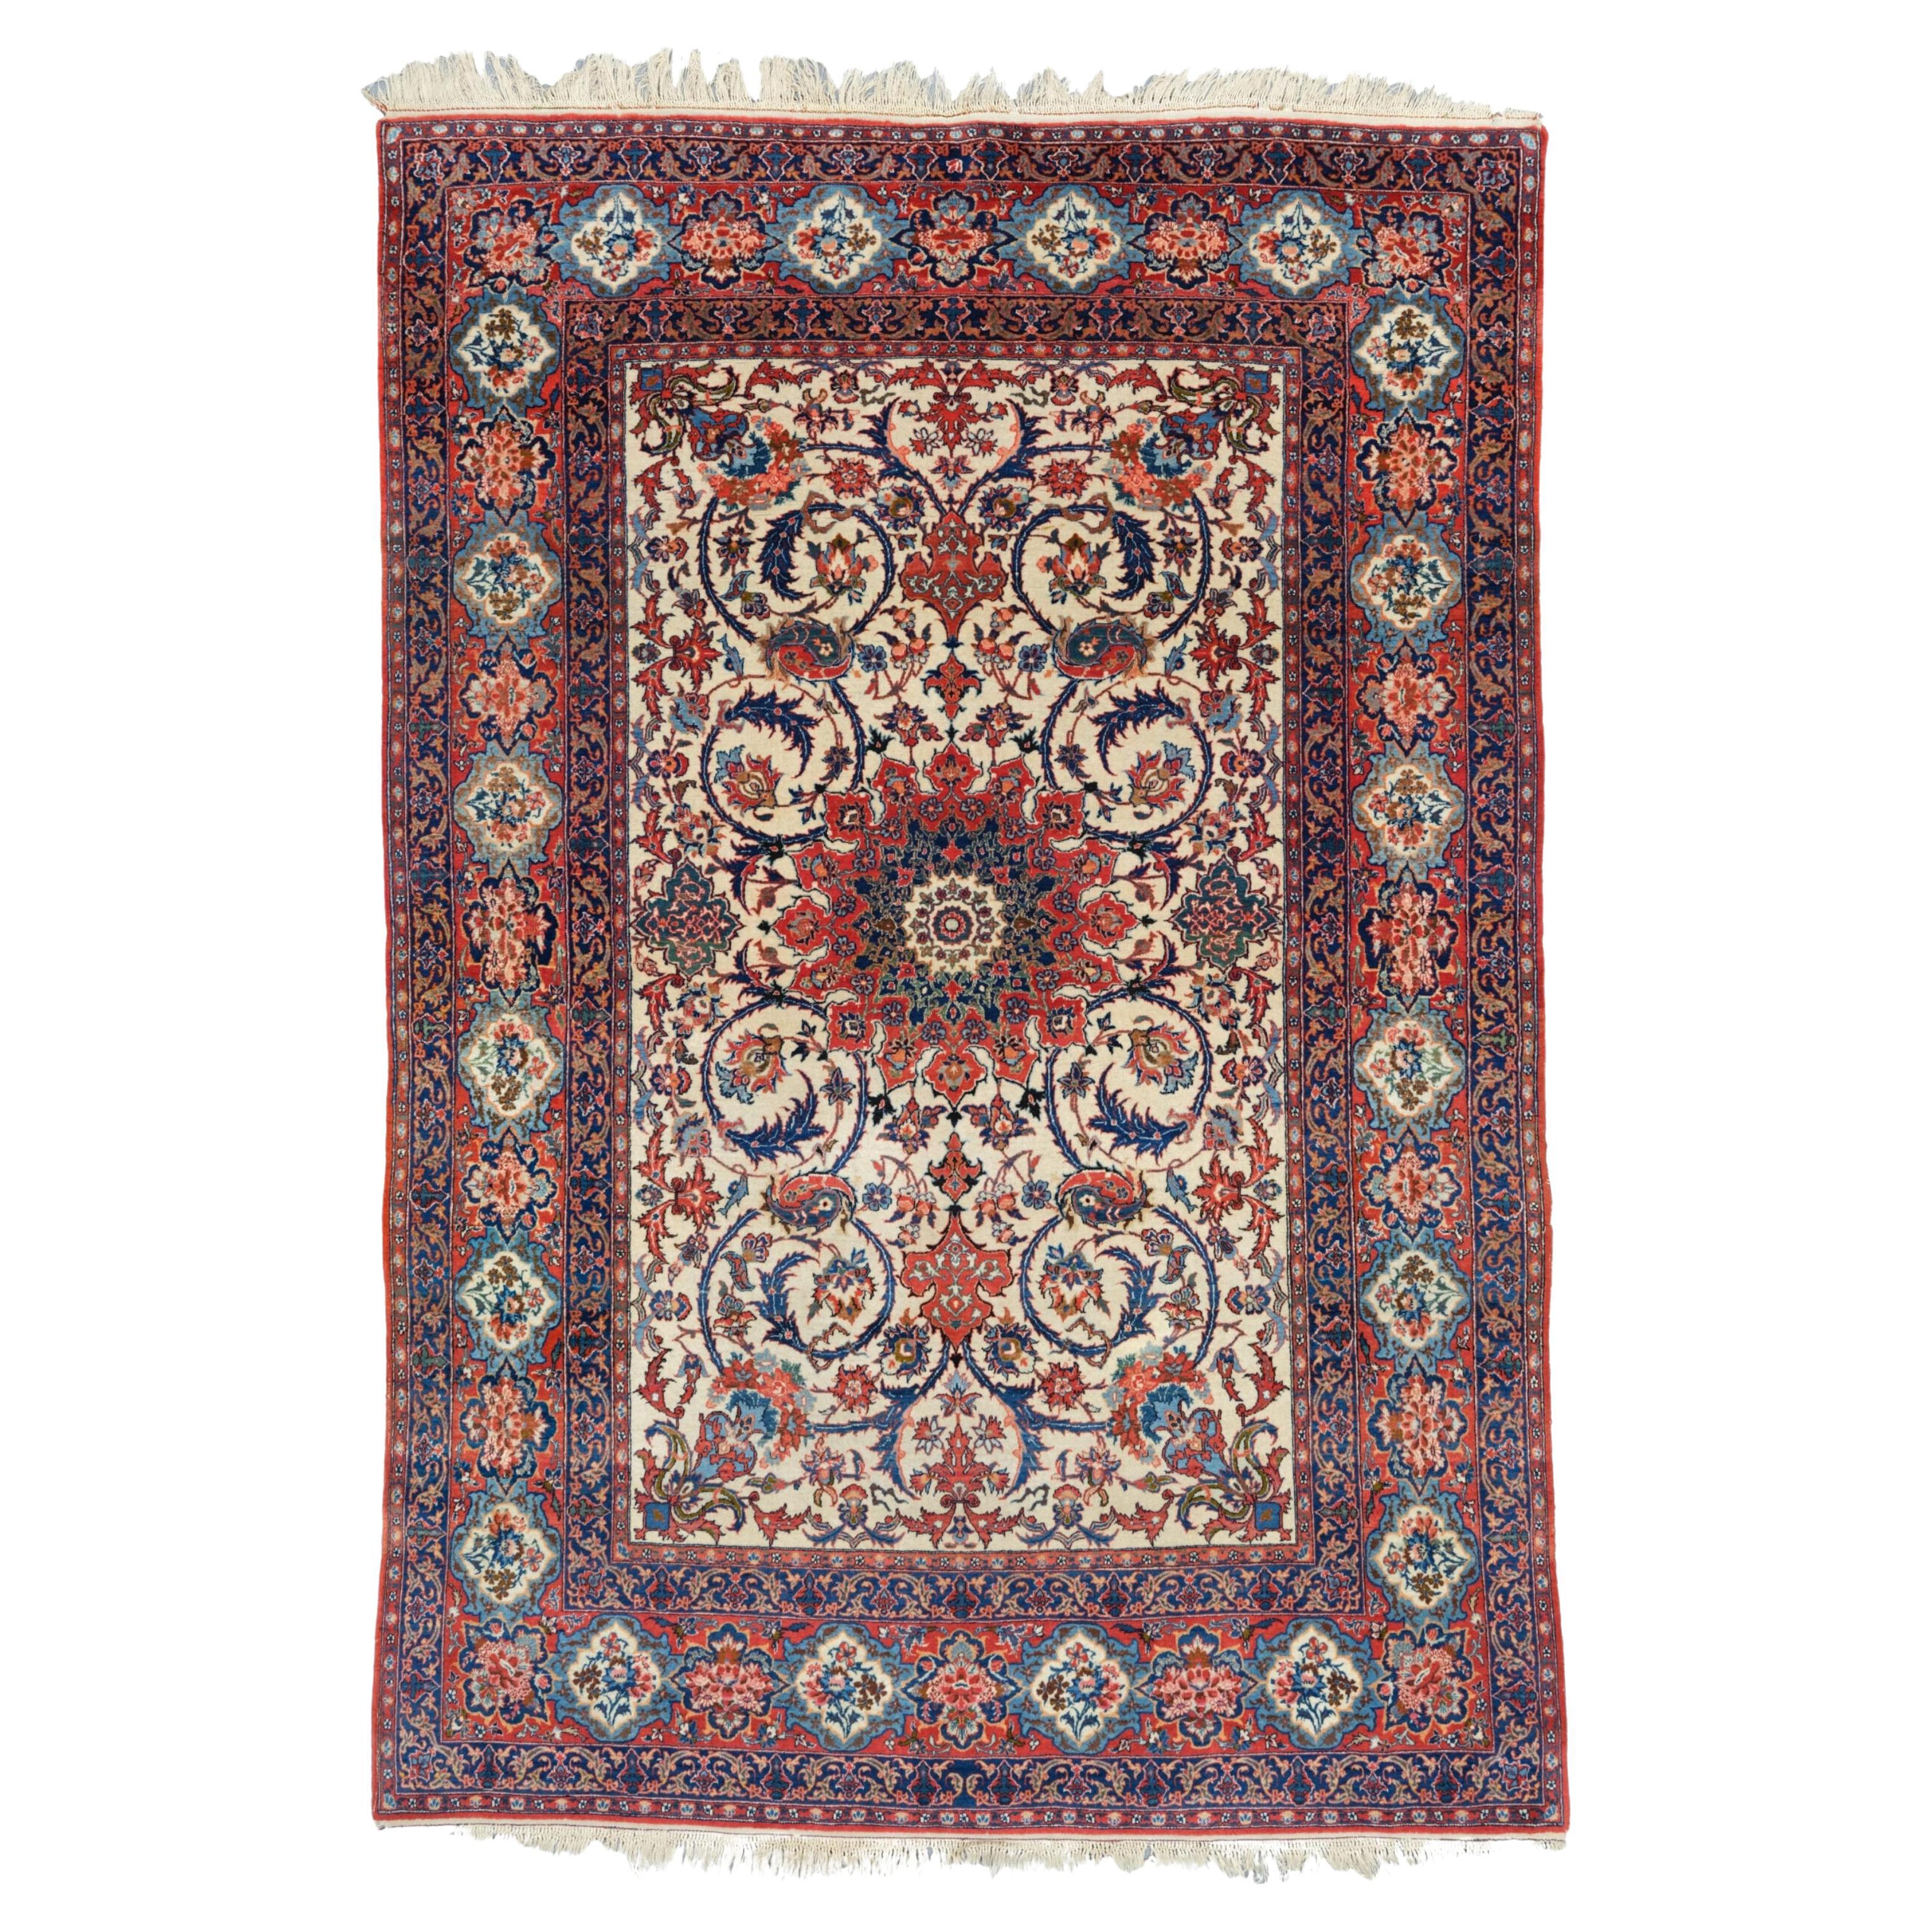 Antique Isfahan Rug - Late of 19th Century Isfahan Rug, Antique Rugs For Sale